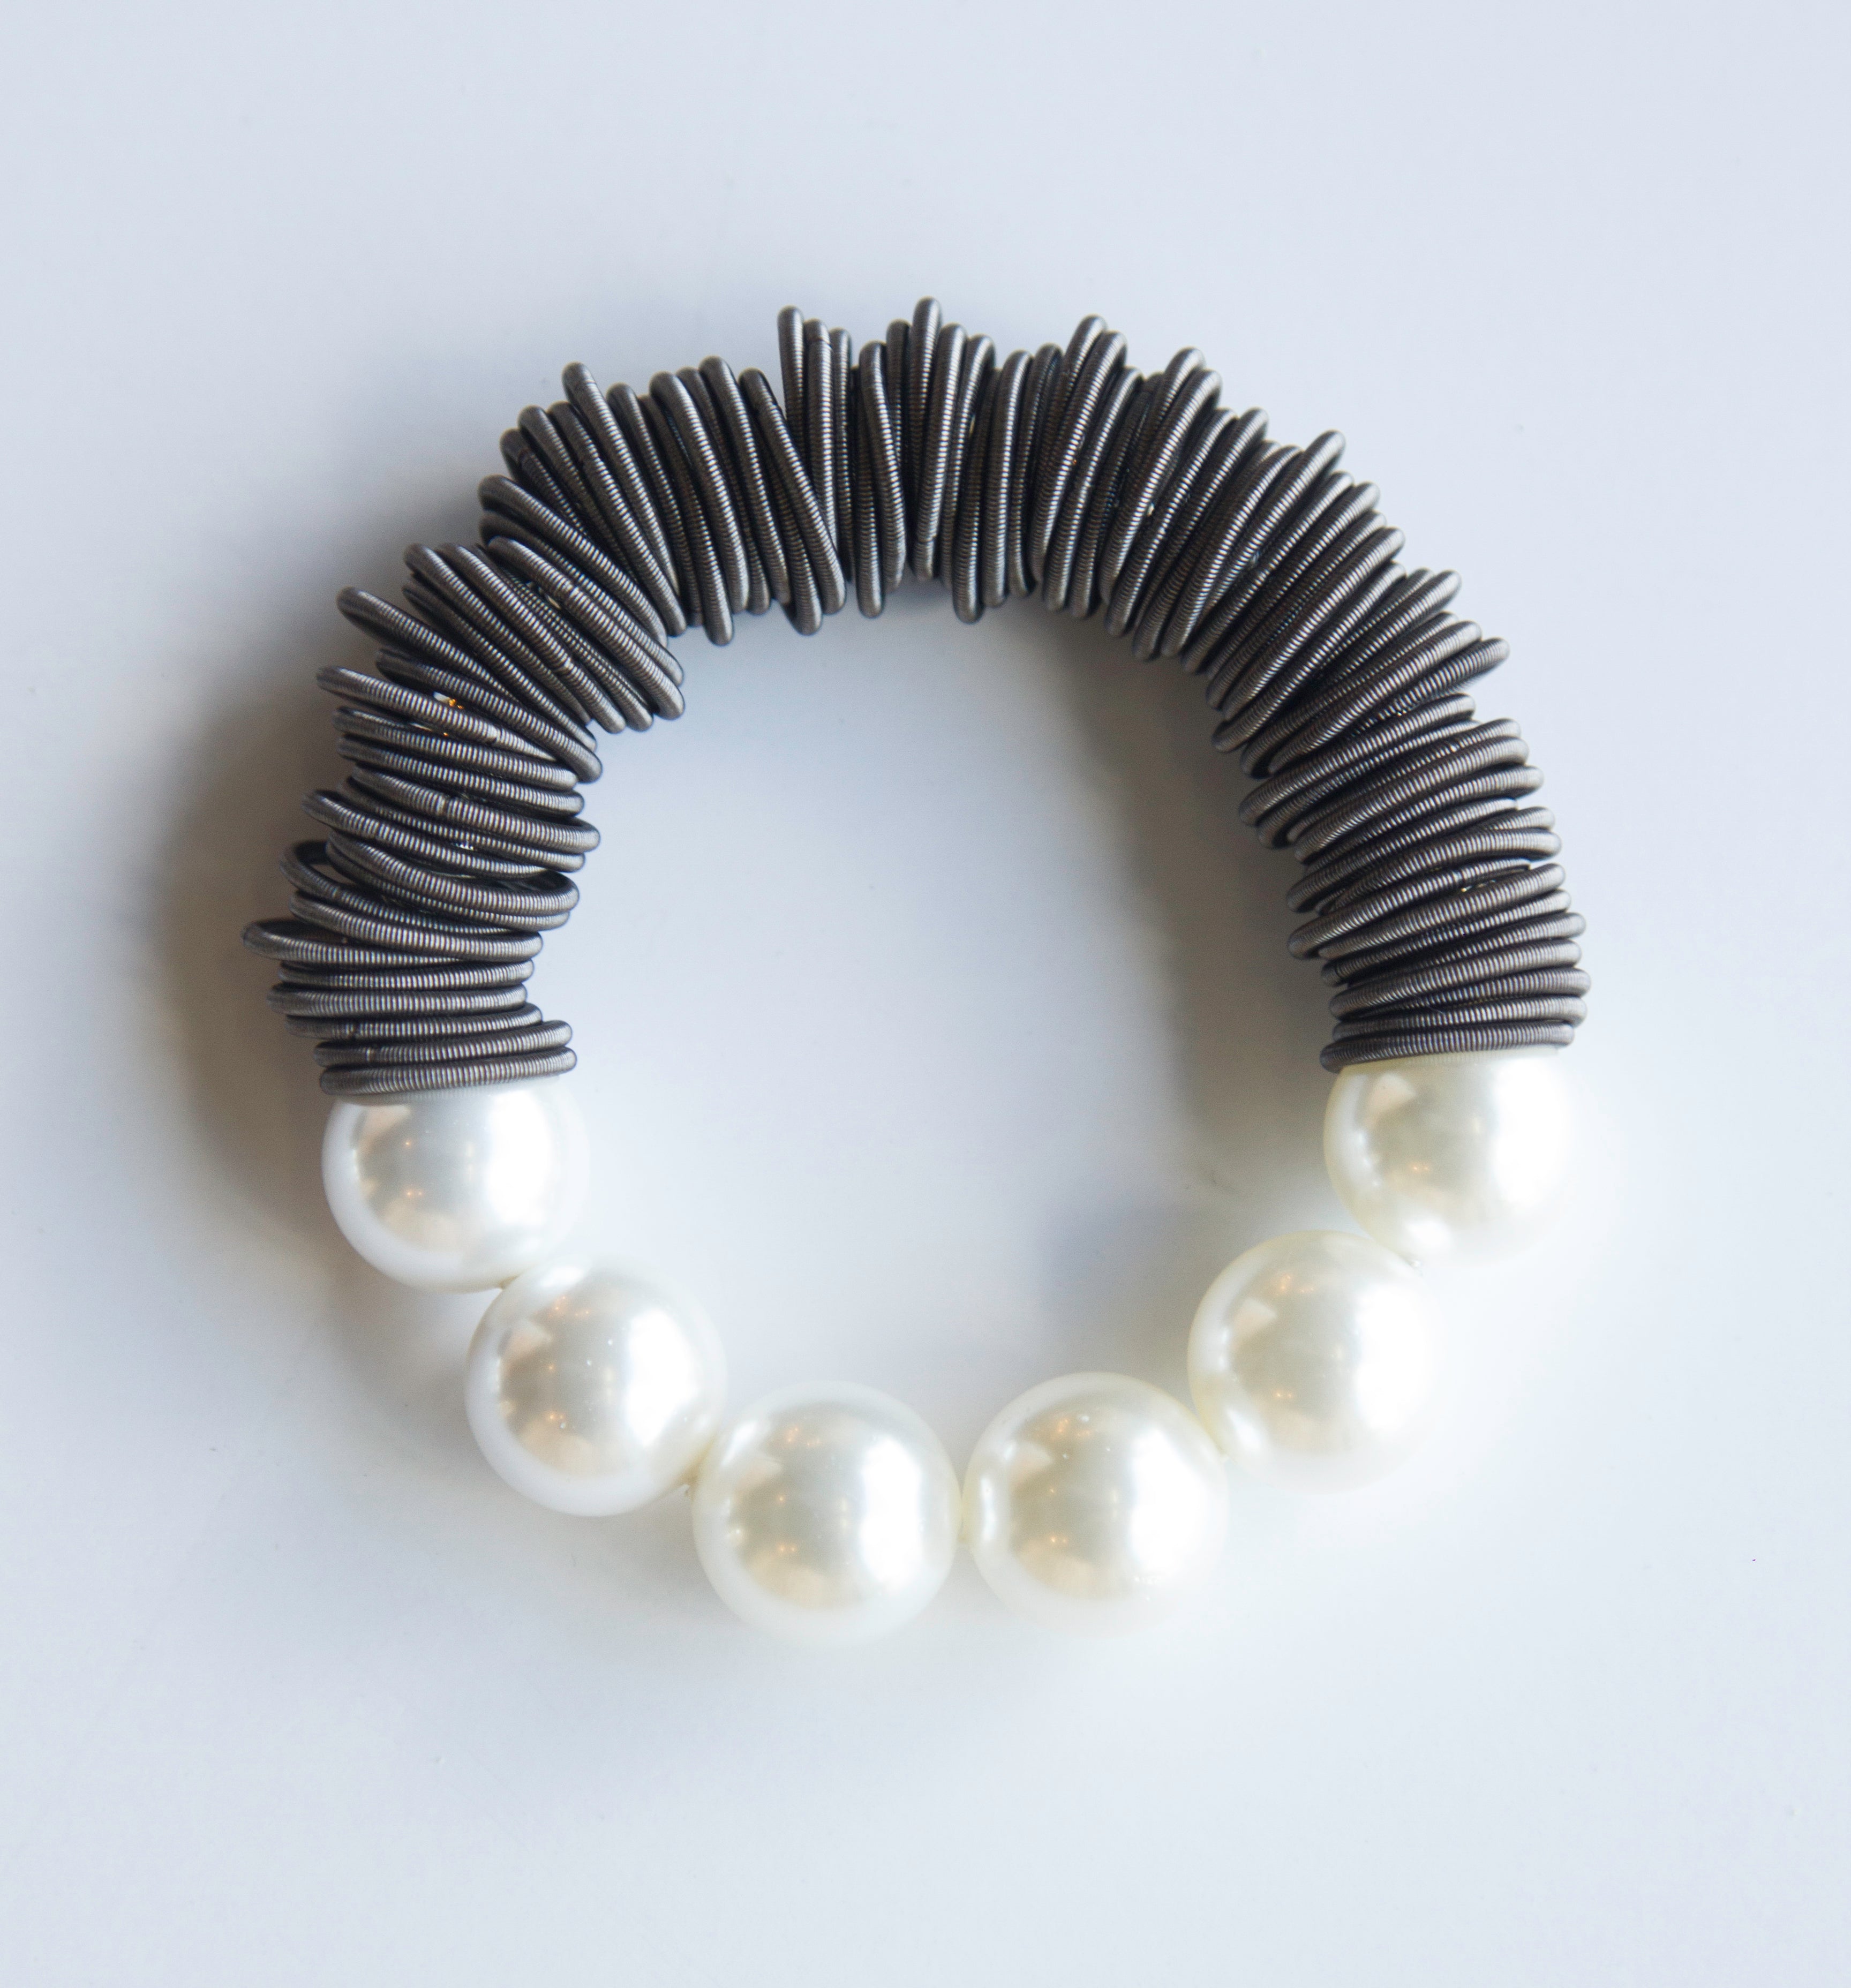 Lorraine Sayer, Pearl and Spring Ring Bracelet